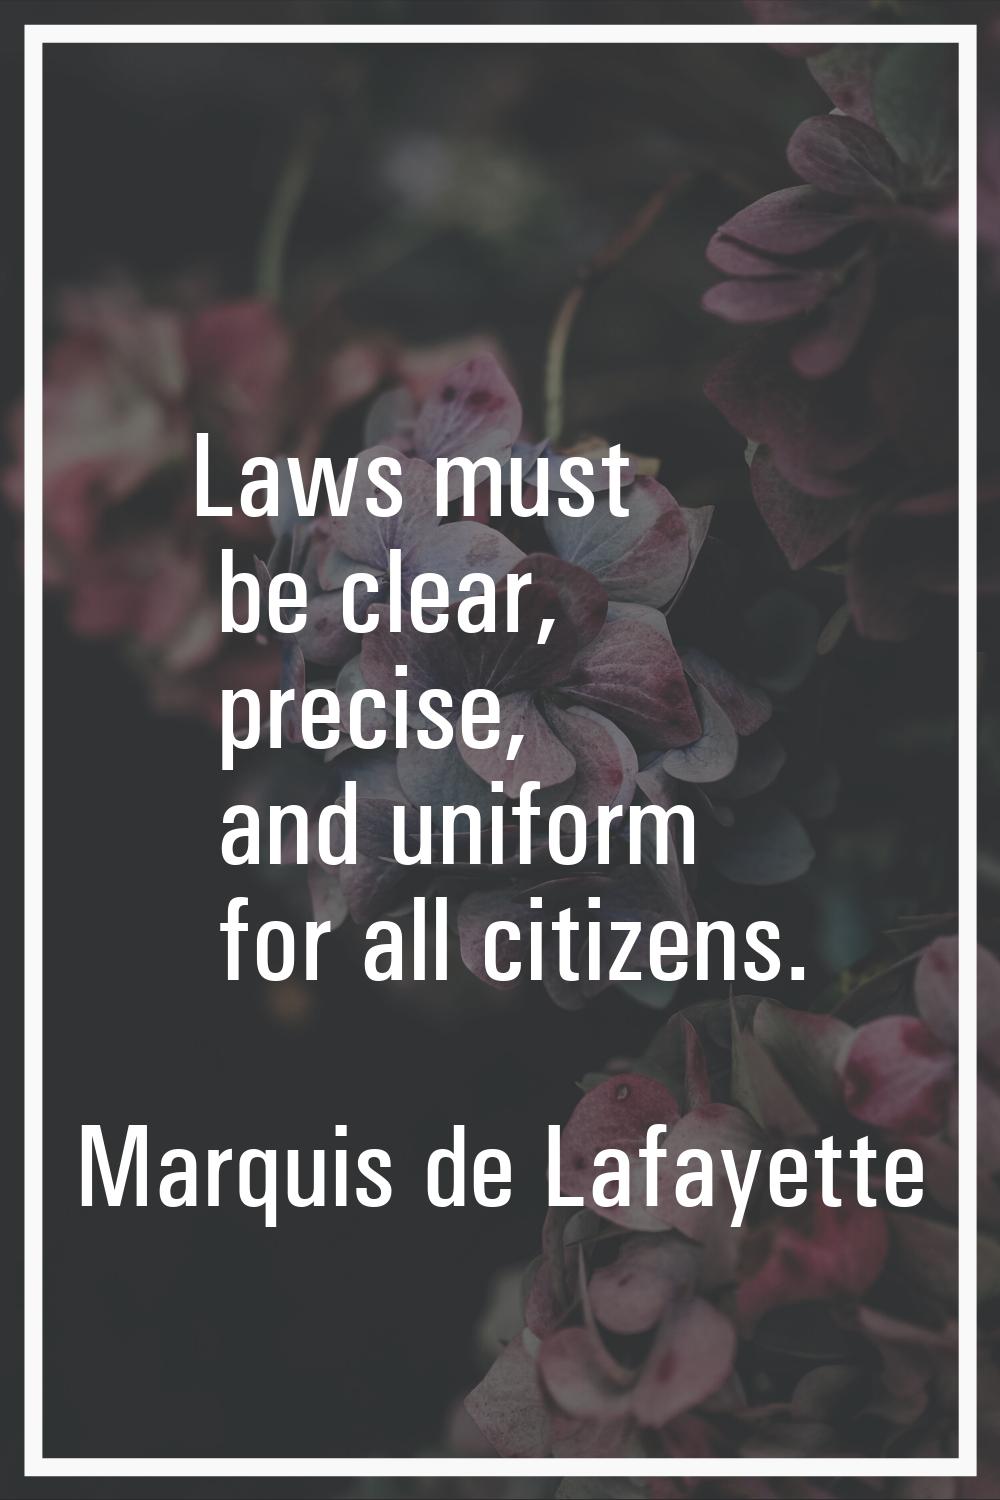 Laws must be clear, precise, and uniform for all citizens.